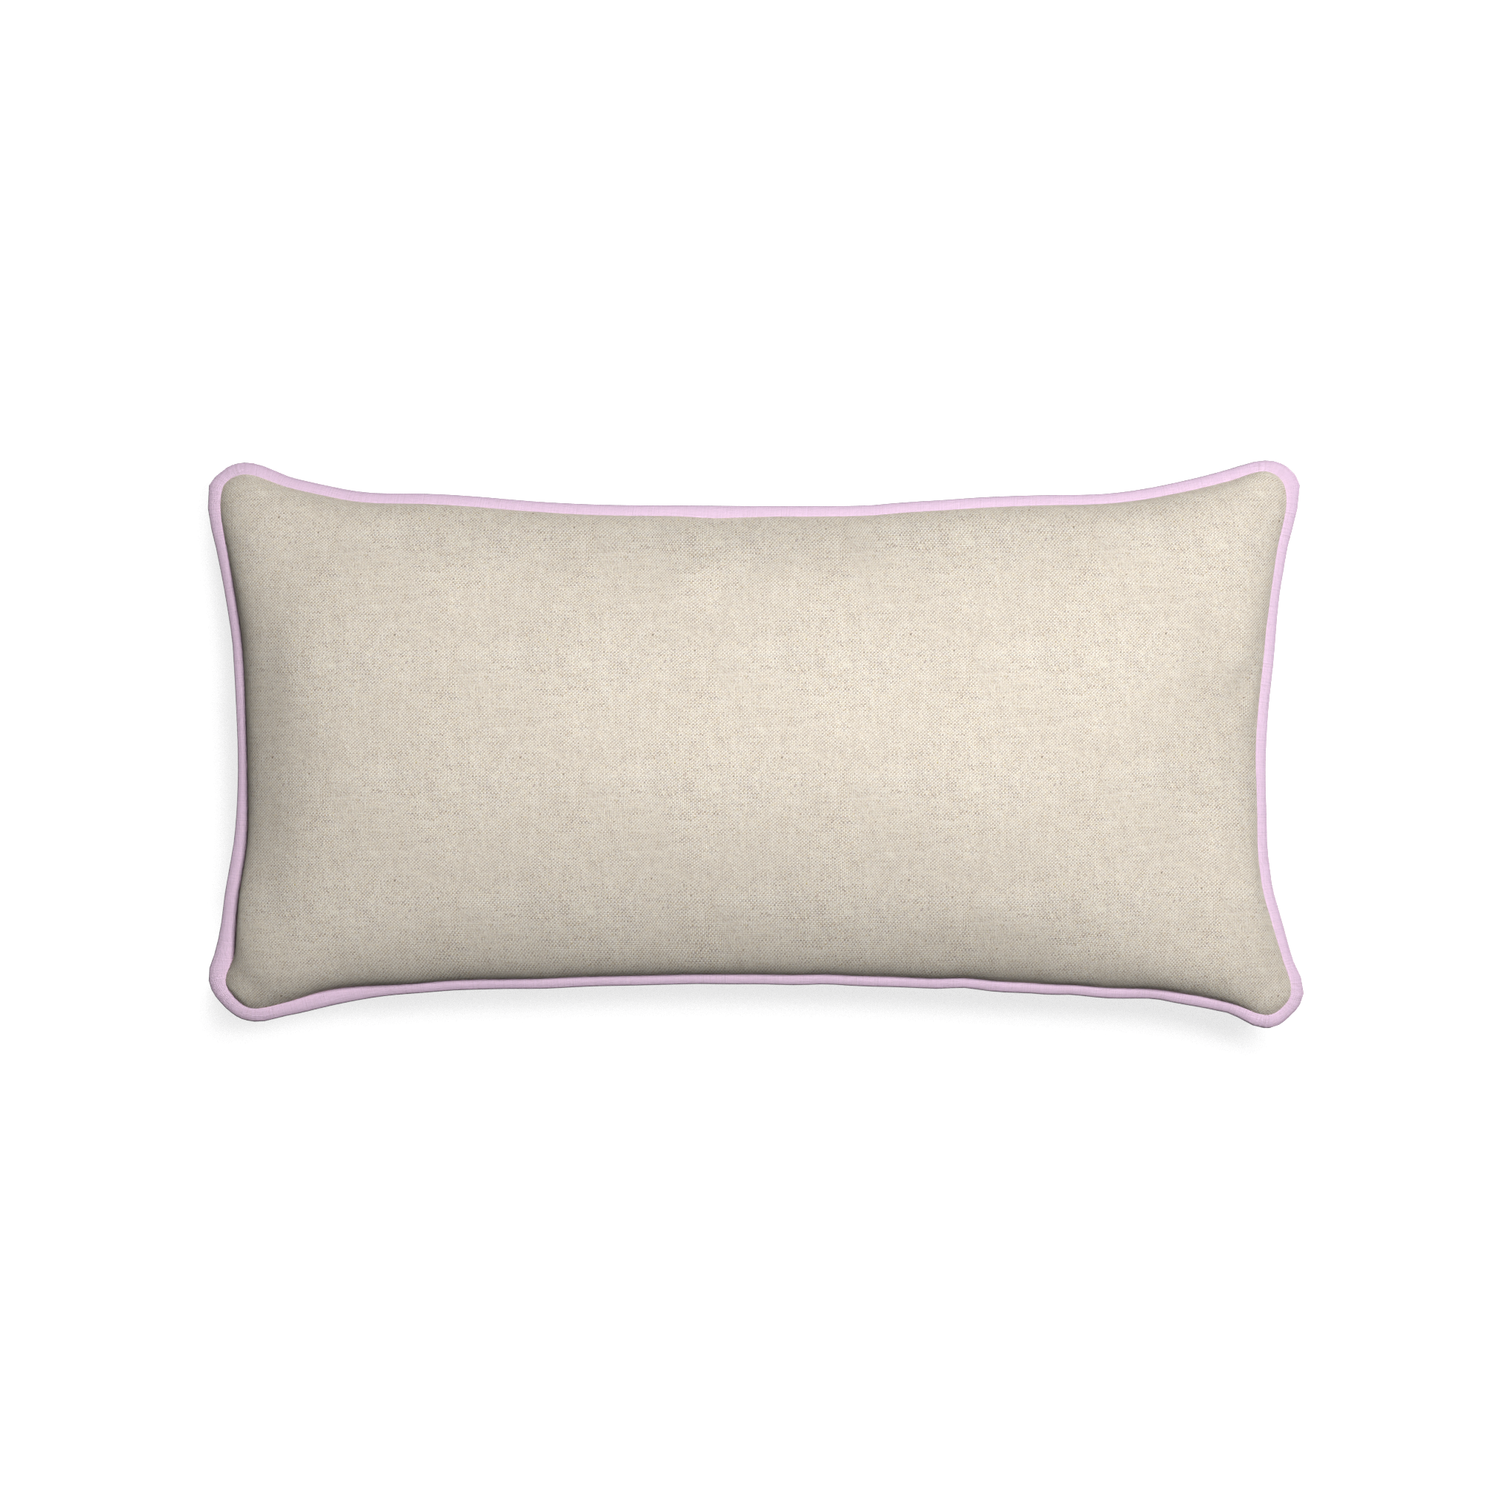 Midi-lumbar oat custom light brownpillow with l piping on white background